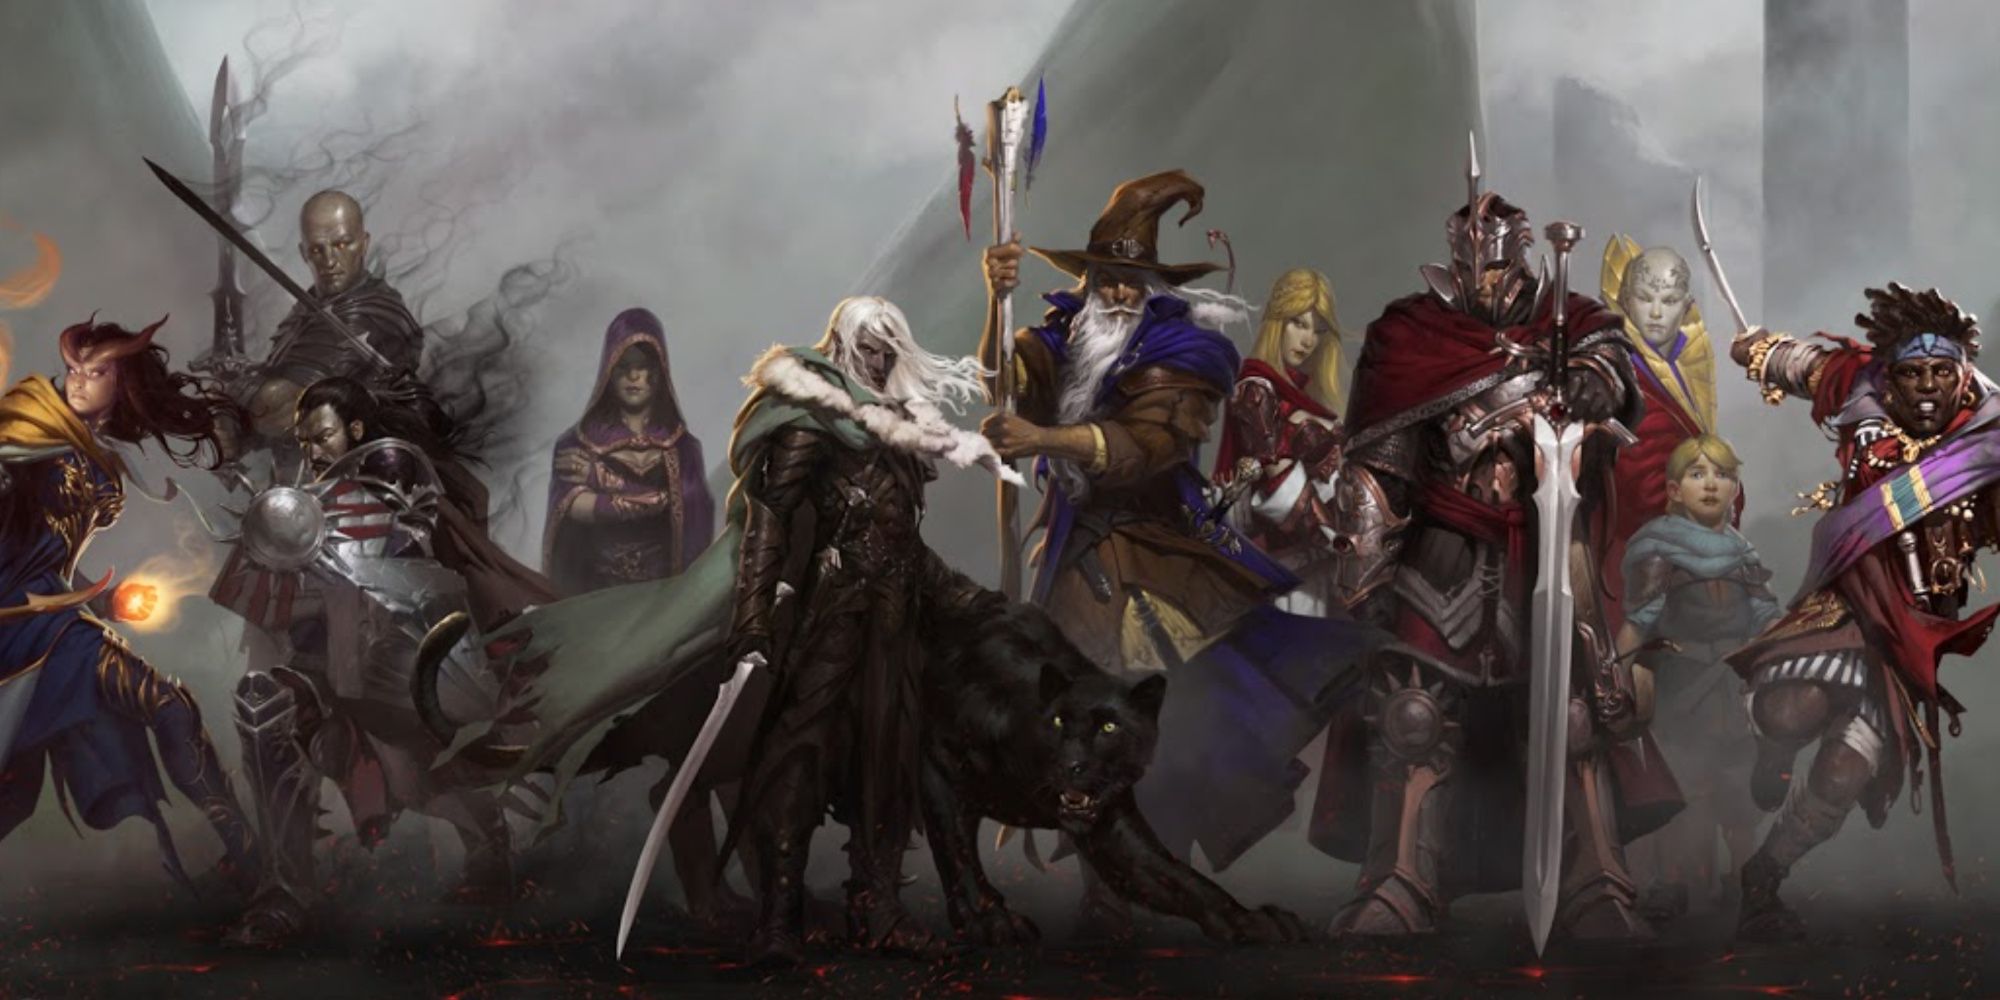 The Sundering Lineup by Tyler Jacobson featuring many different characters from dungeons & dragons like Drizzt Do'Urden, fighters, a sorcerer, a tiefling mage, and many adventurers